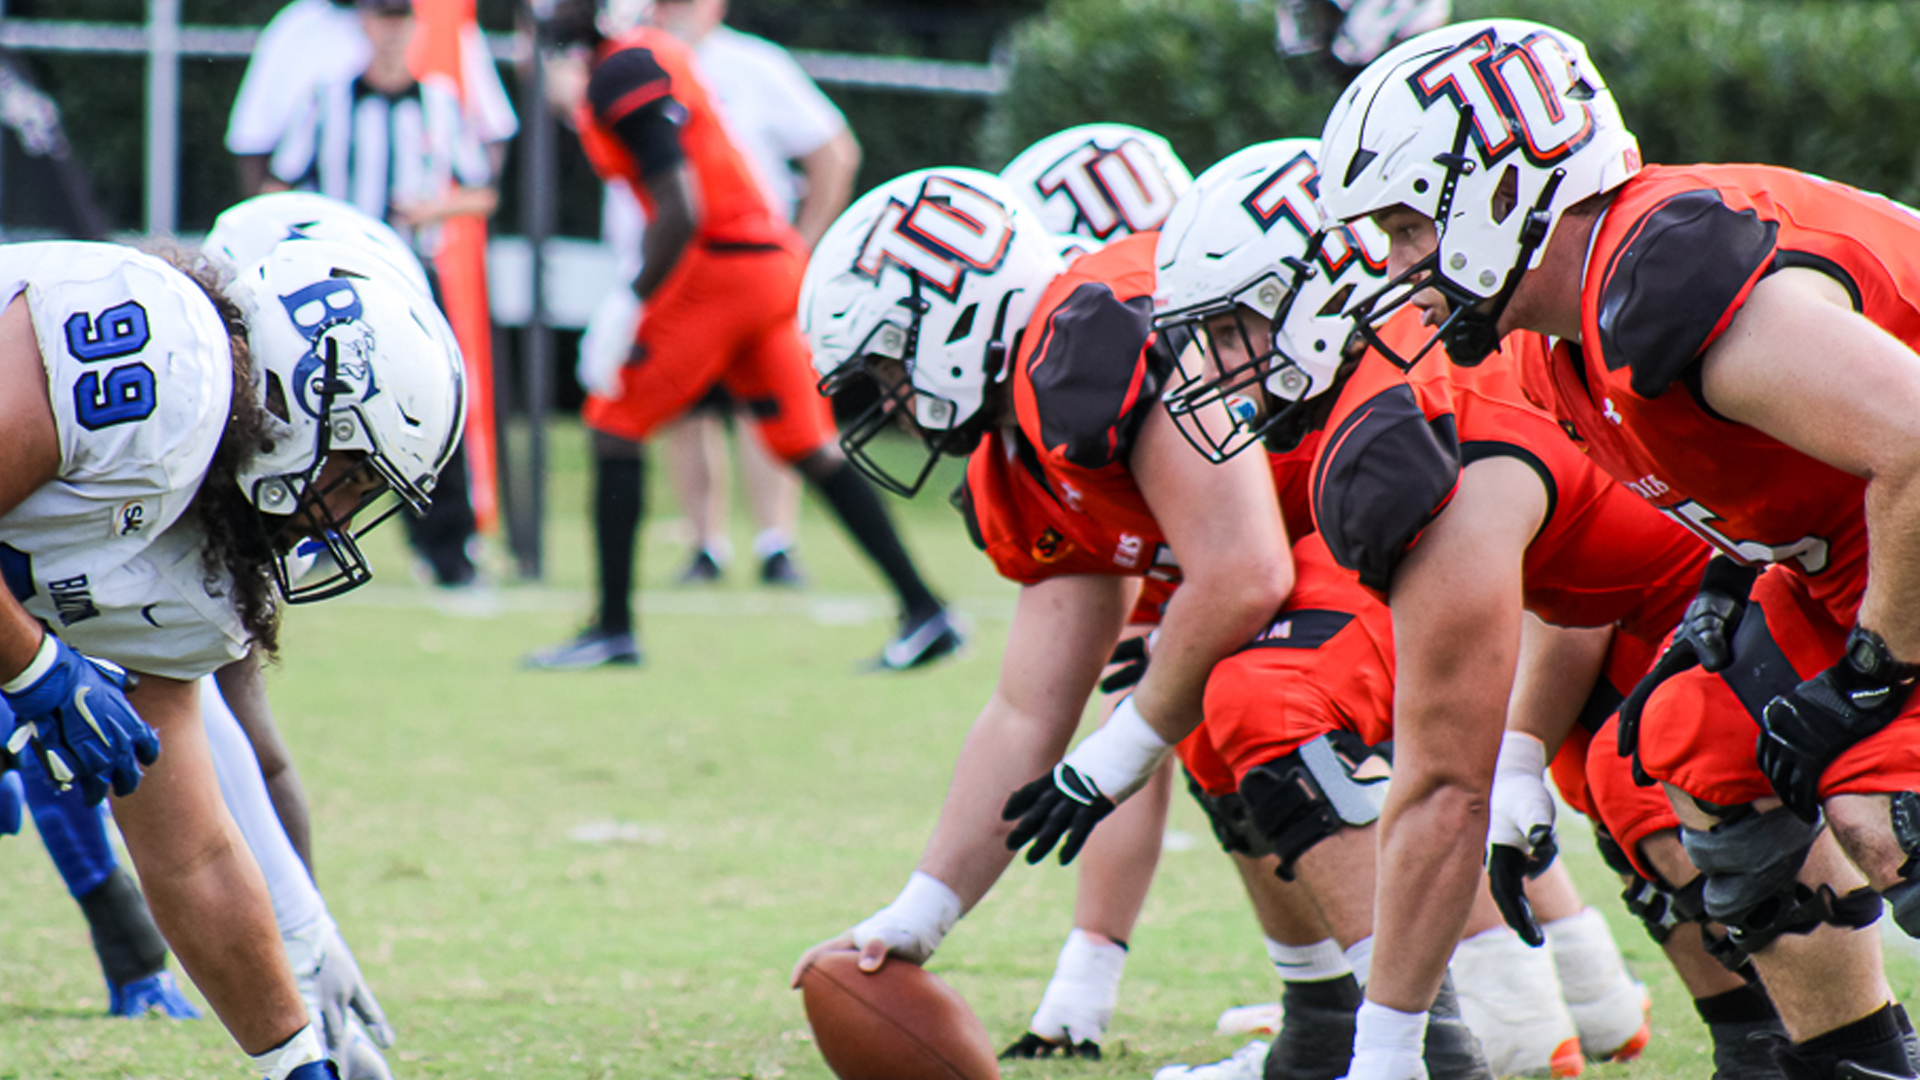 Tusculum hosts UVA Wise for Homecoming this Saturday